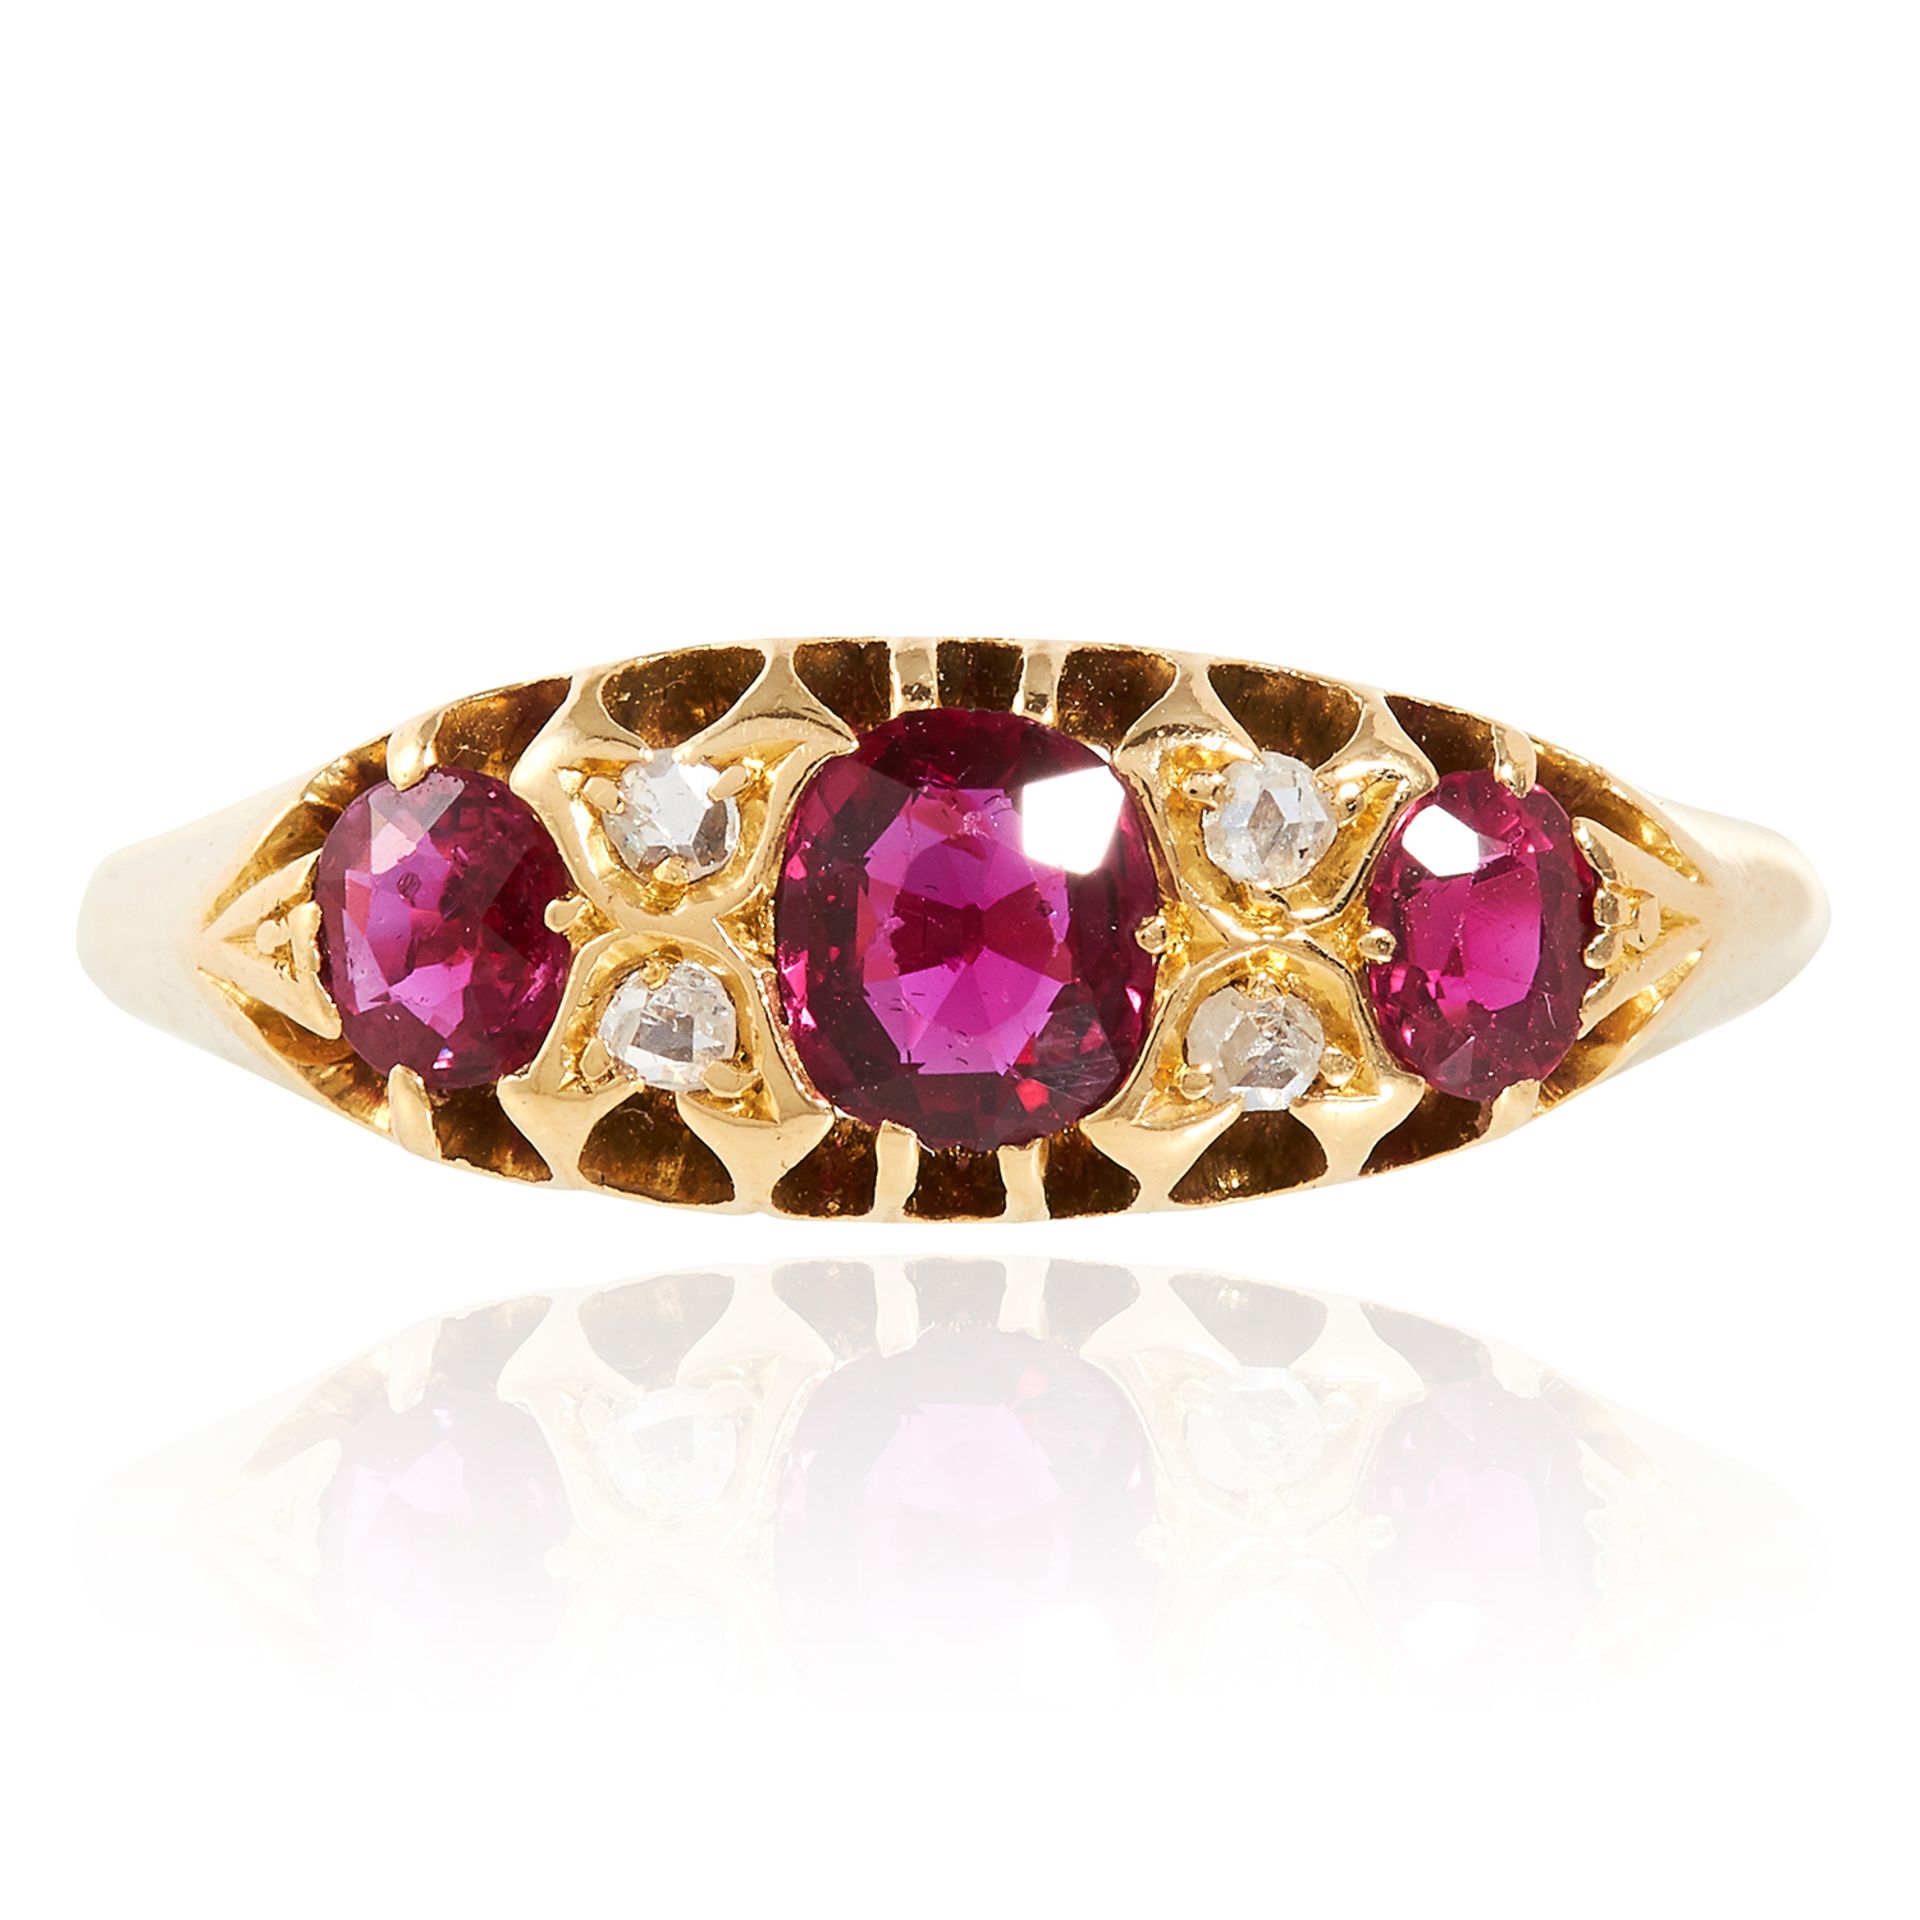 AN ANTIQUE RUBY AND DIAMOND DRESS RING in high carat yellow gold, set with three cushion cut